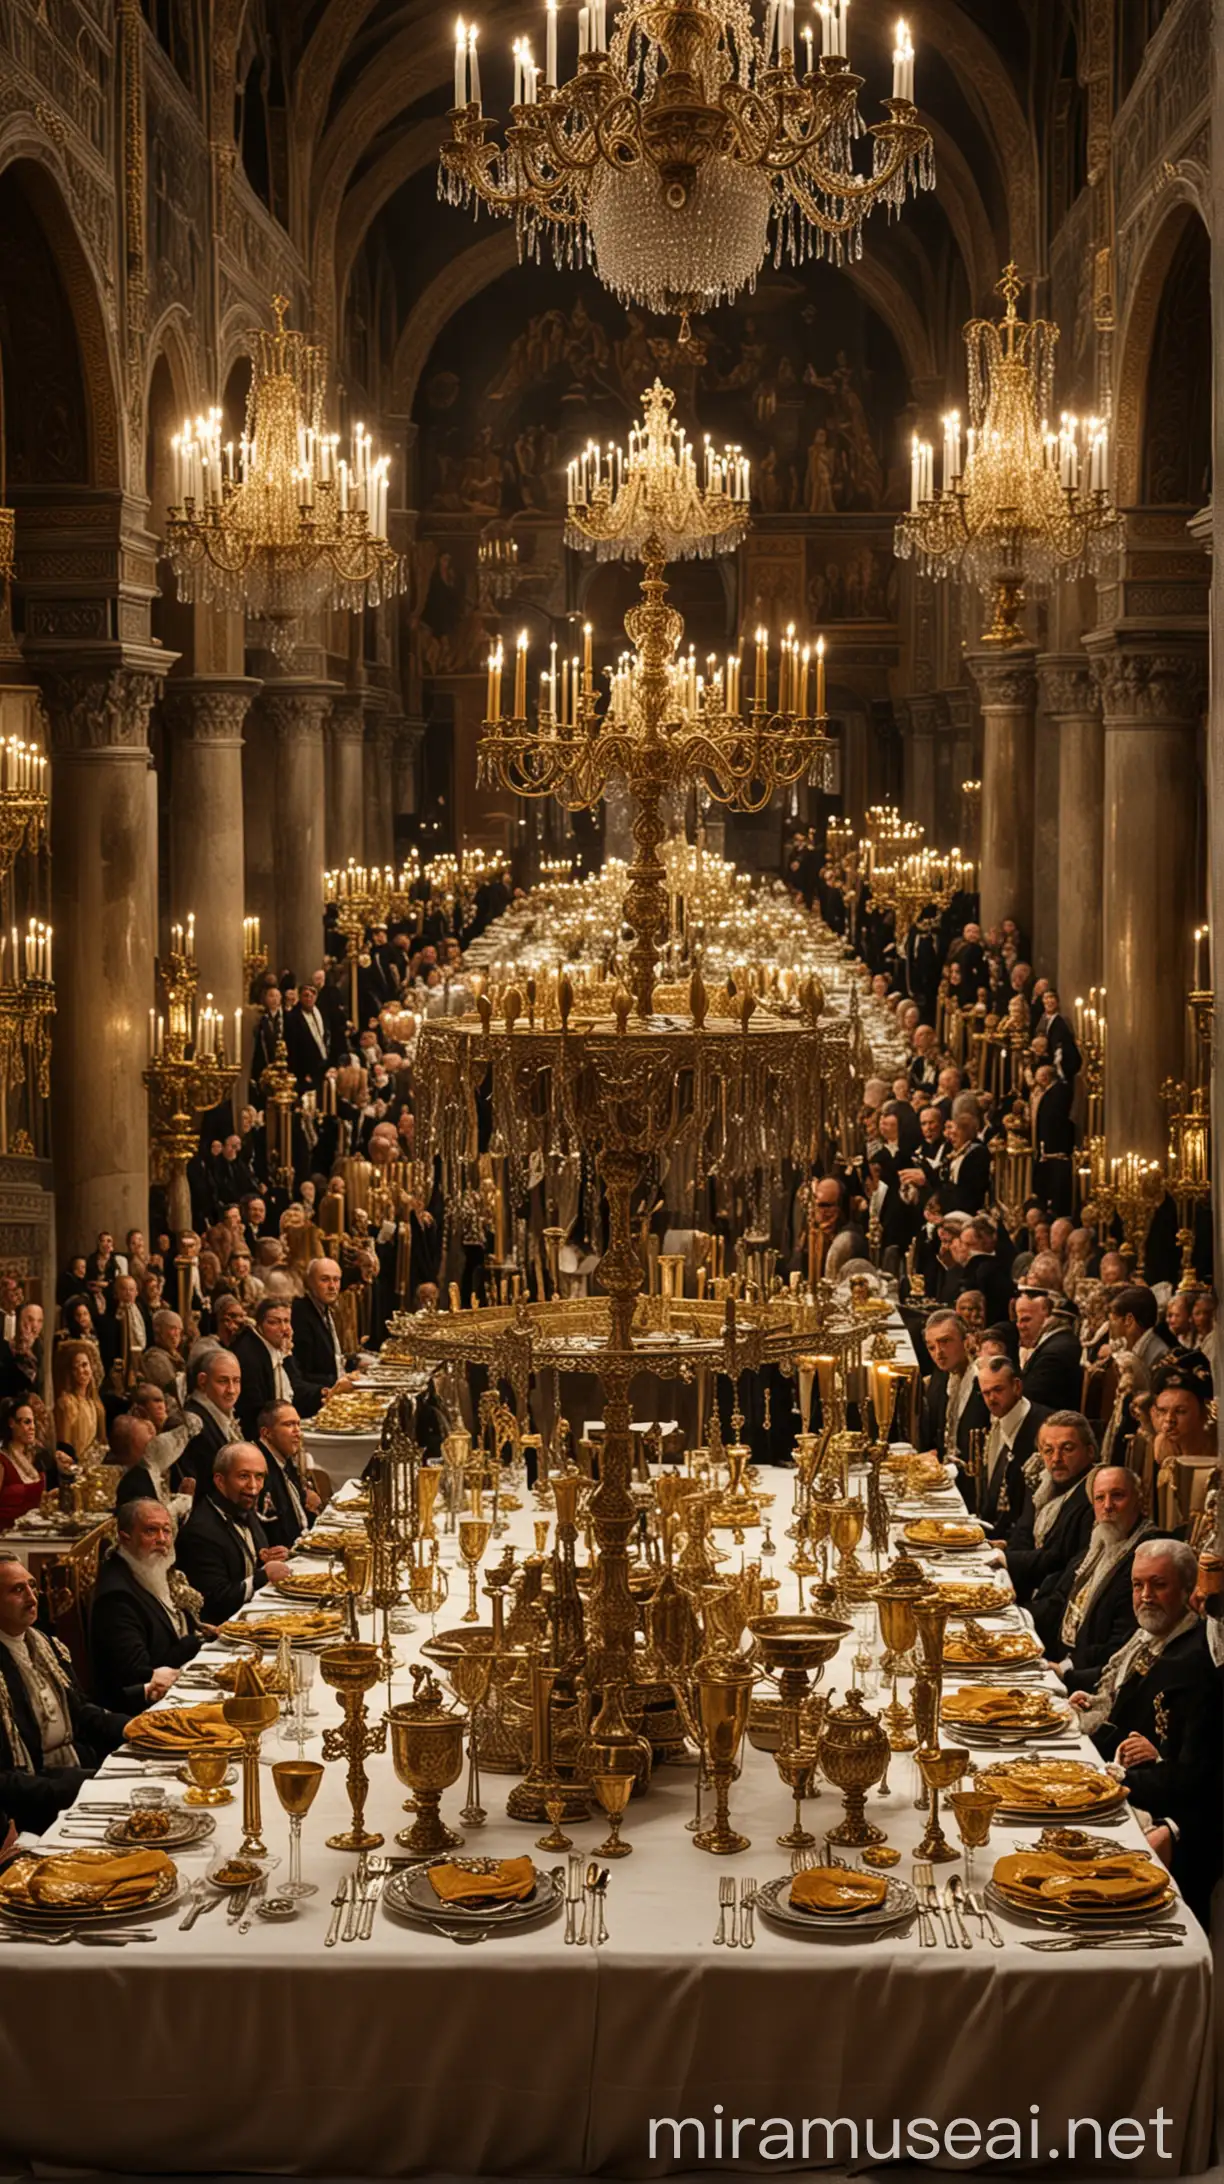 A grand banquet ancient hall with a lavish table set for a thousand guests, featuring golden and silver utensils, candelabras, and a king's throne. Belshazzar, a regal figure with a crown and royal robes, sits at the head of the table, surrounded by his guests."In ancient world 